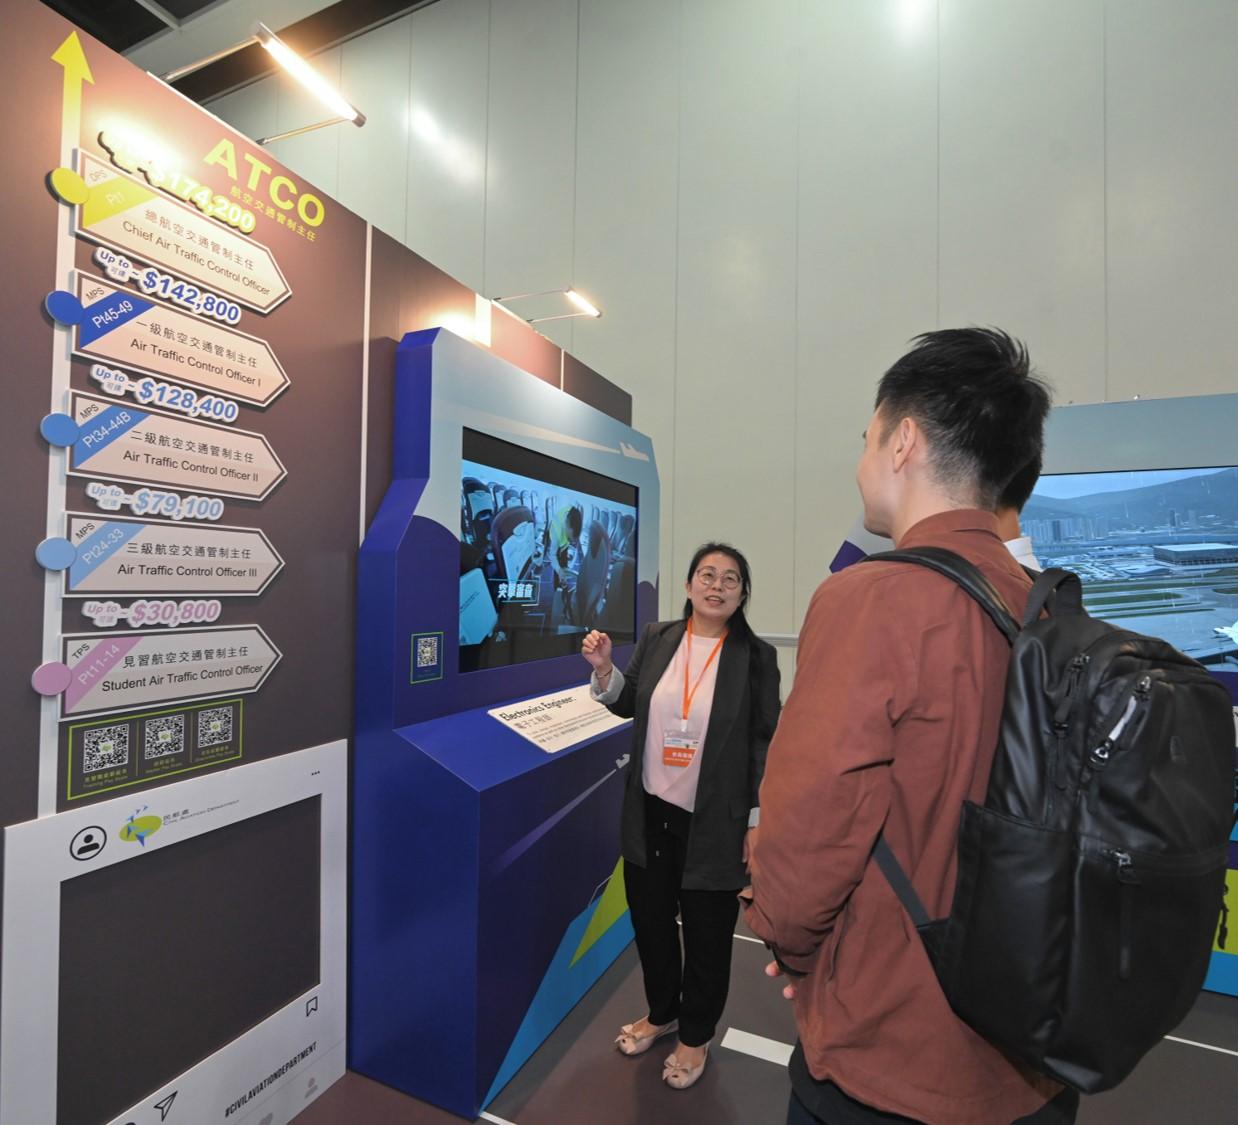 The Civil Aviation Department (CAD) participates in the Hong Kong International Airport Career Expo 2023 for three consecutive days from today (August 4) to August 6 (Sunday) at the Hong Kong Convention and Exhibition Centre in Wan Chai. Photo shows a CAD staff member introducing job duties and career information of various professional grades of the CAD.